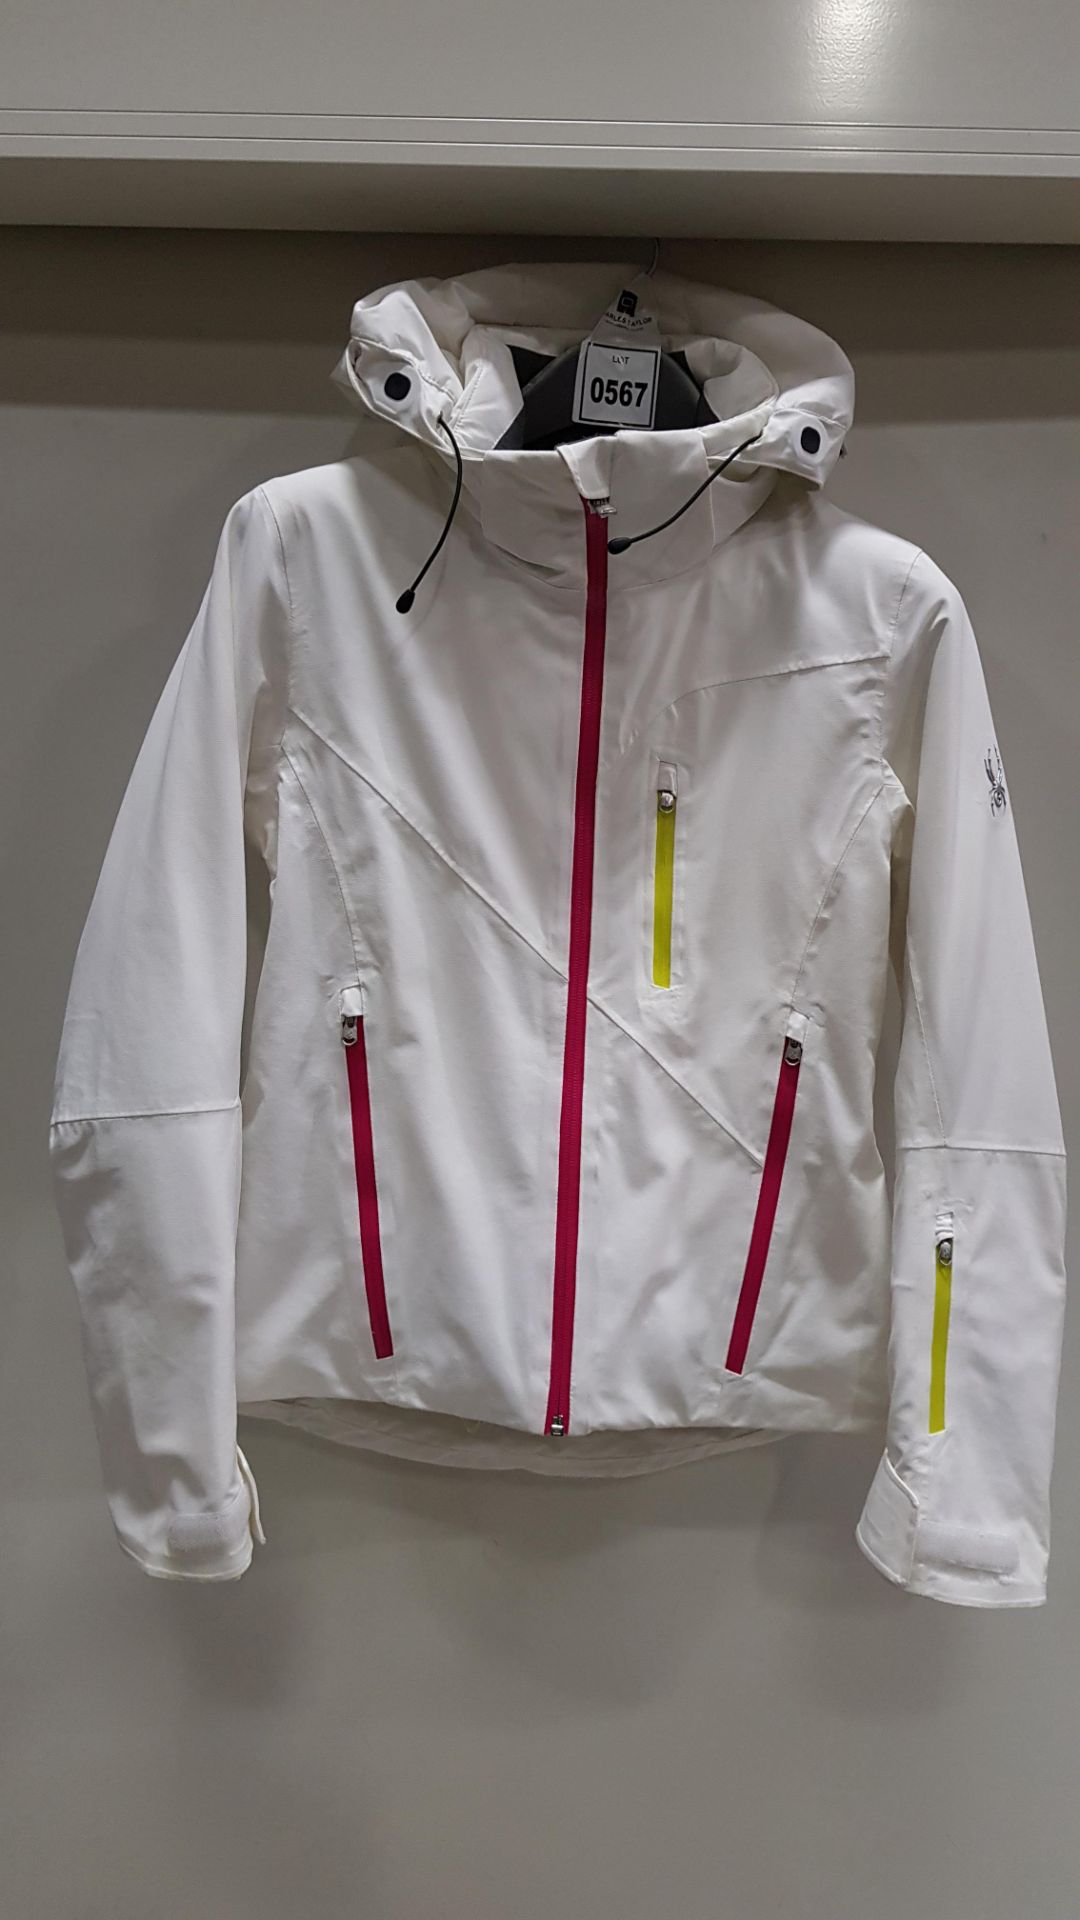 1 X BRAND NEW SPYDER SKI HOODED JACKET IN WHITE WITH PINK AND YELLOW ZIPS - IN SIZE UK 6